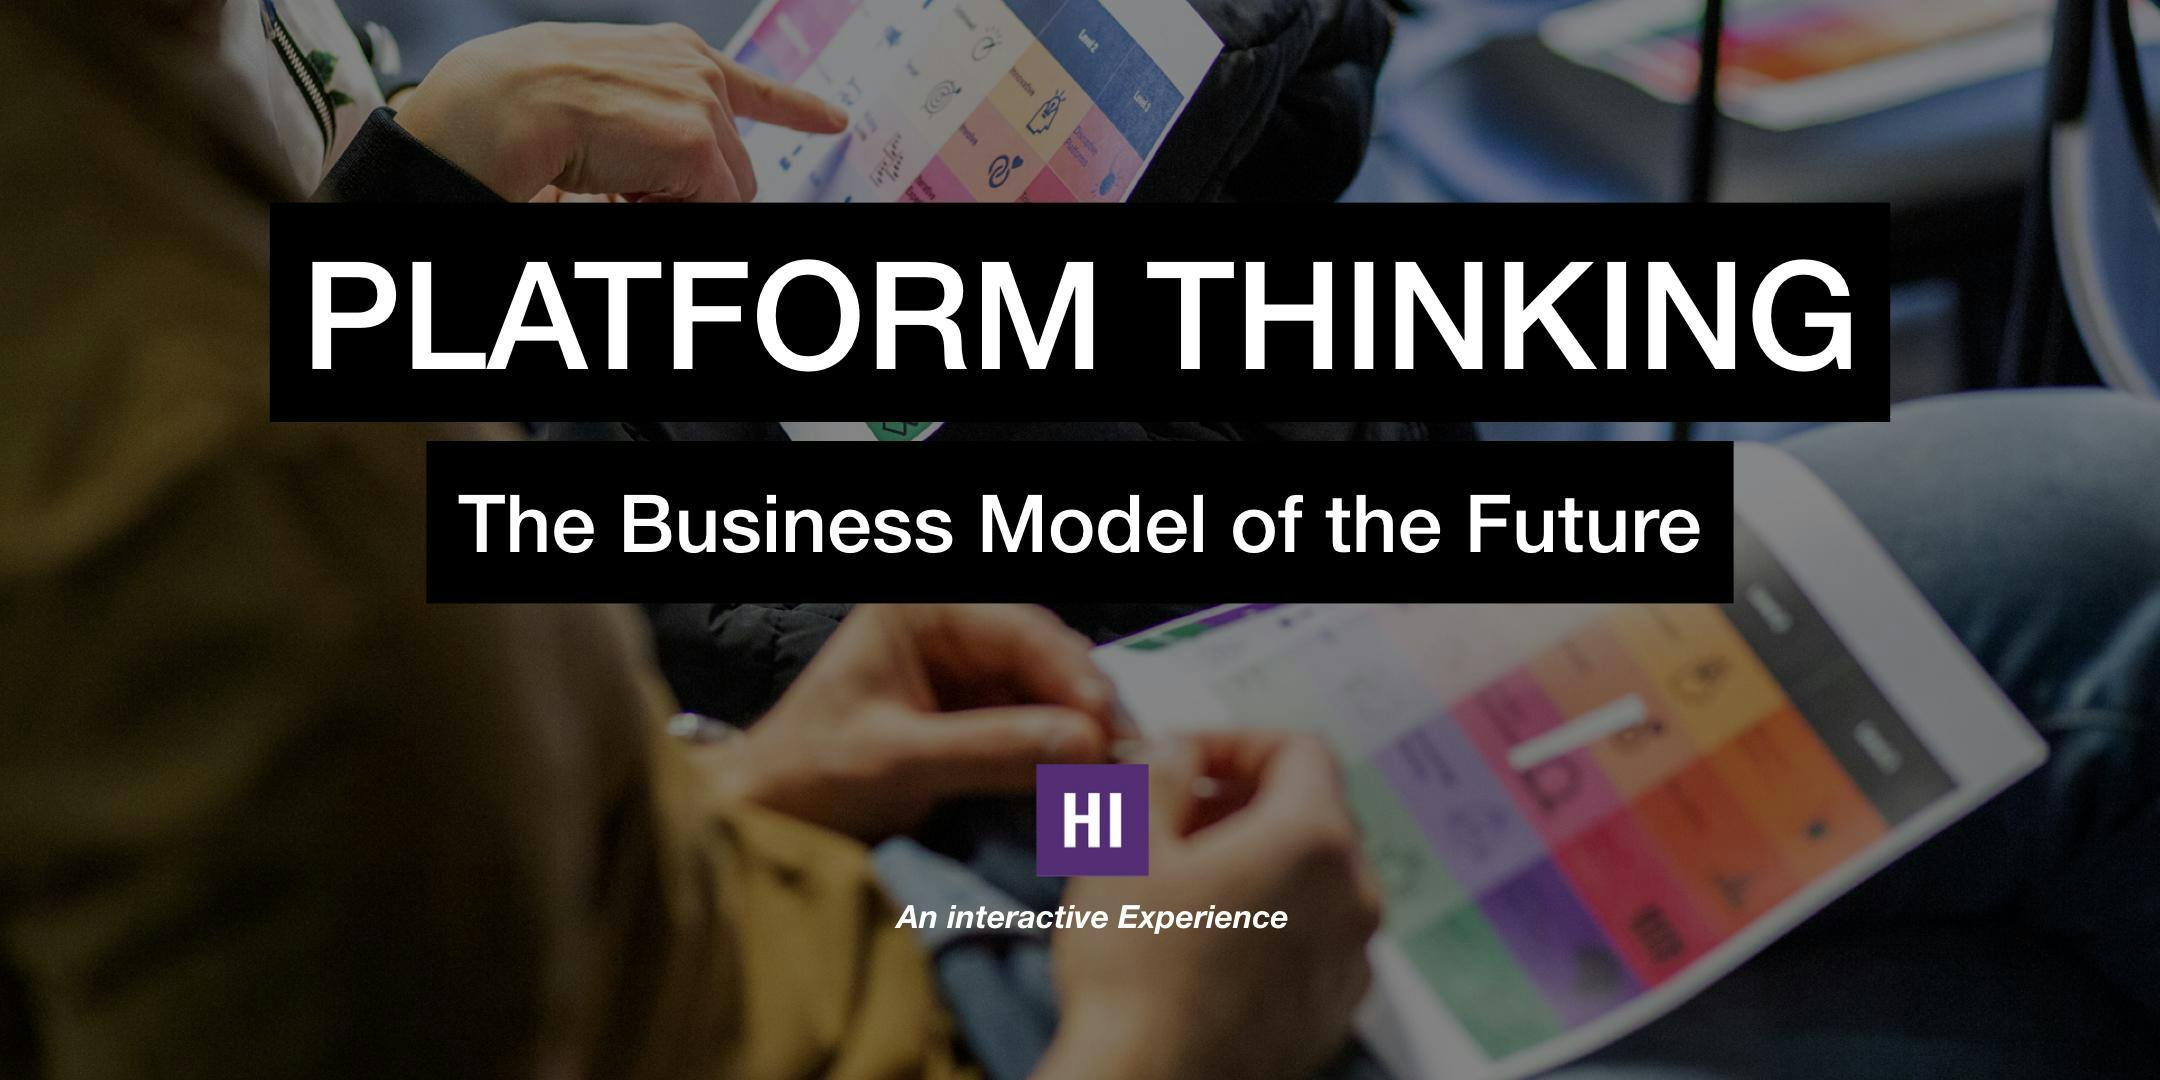 Platform Thinking - The Future of Business Models